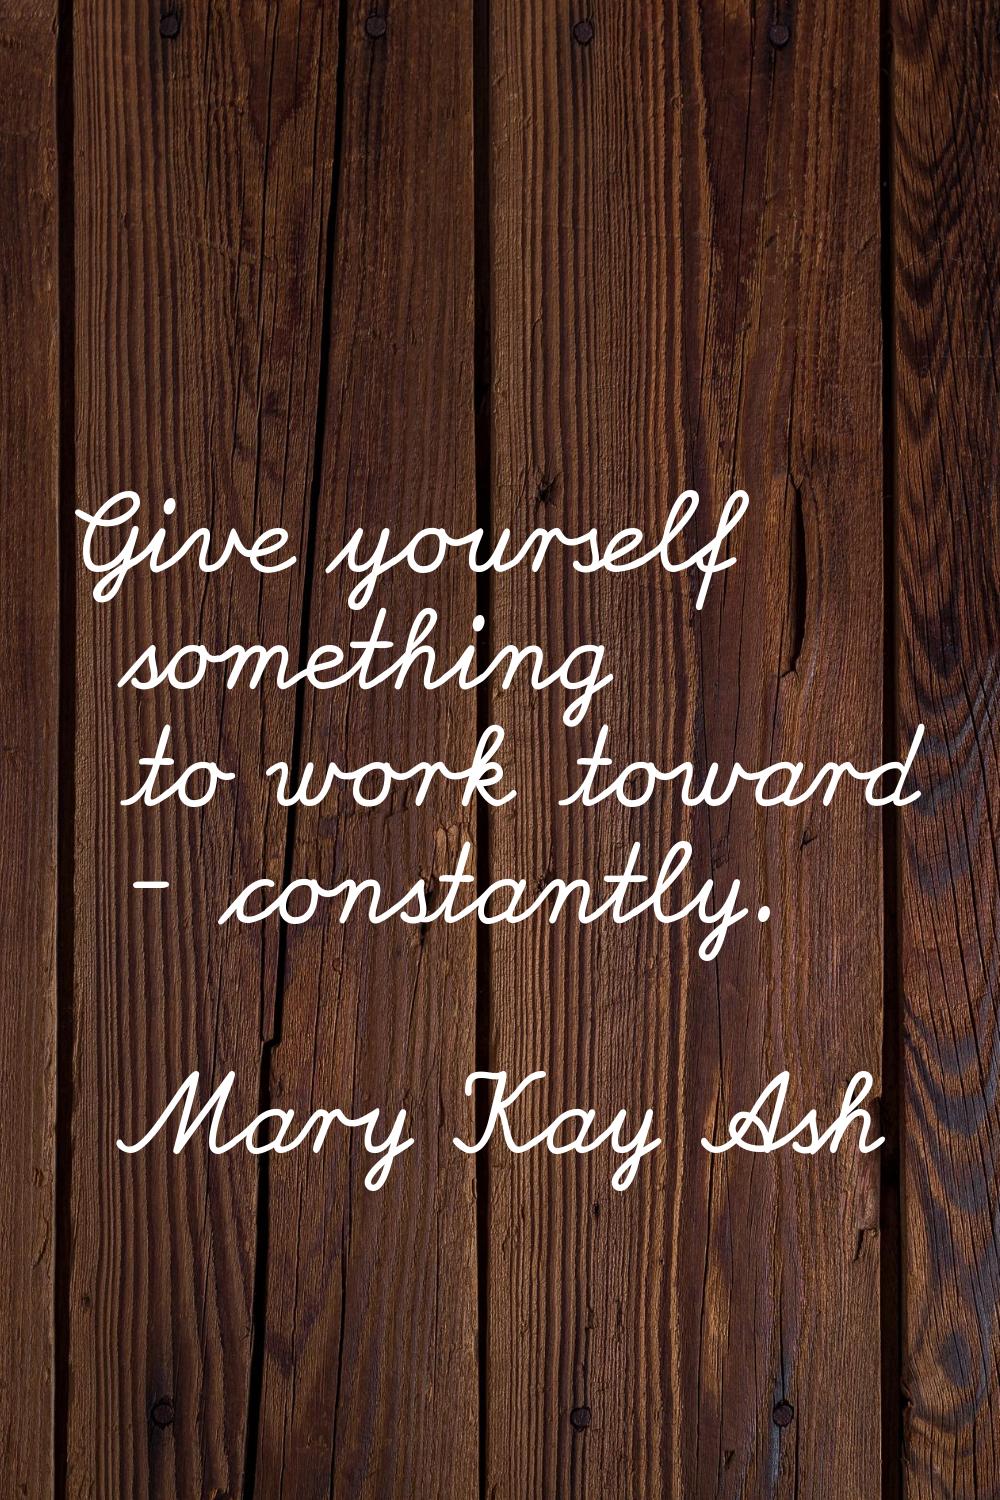 Give yourself something to work toward - constantly.